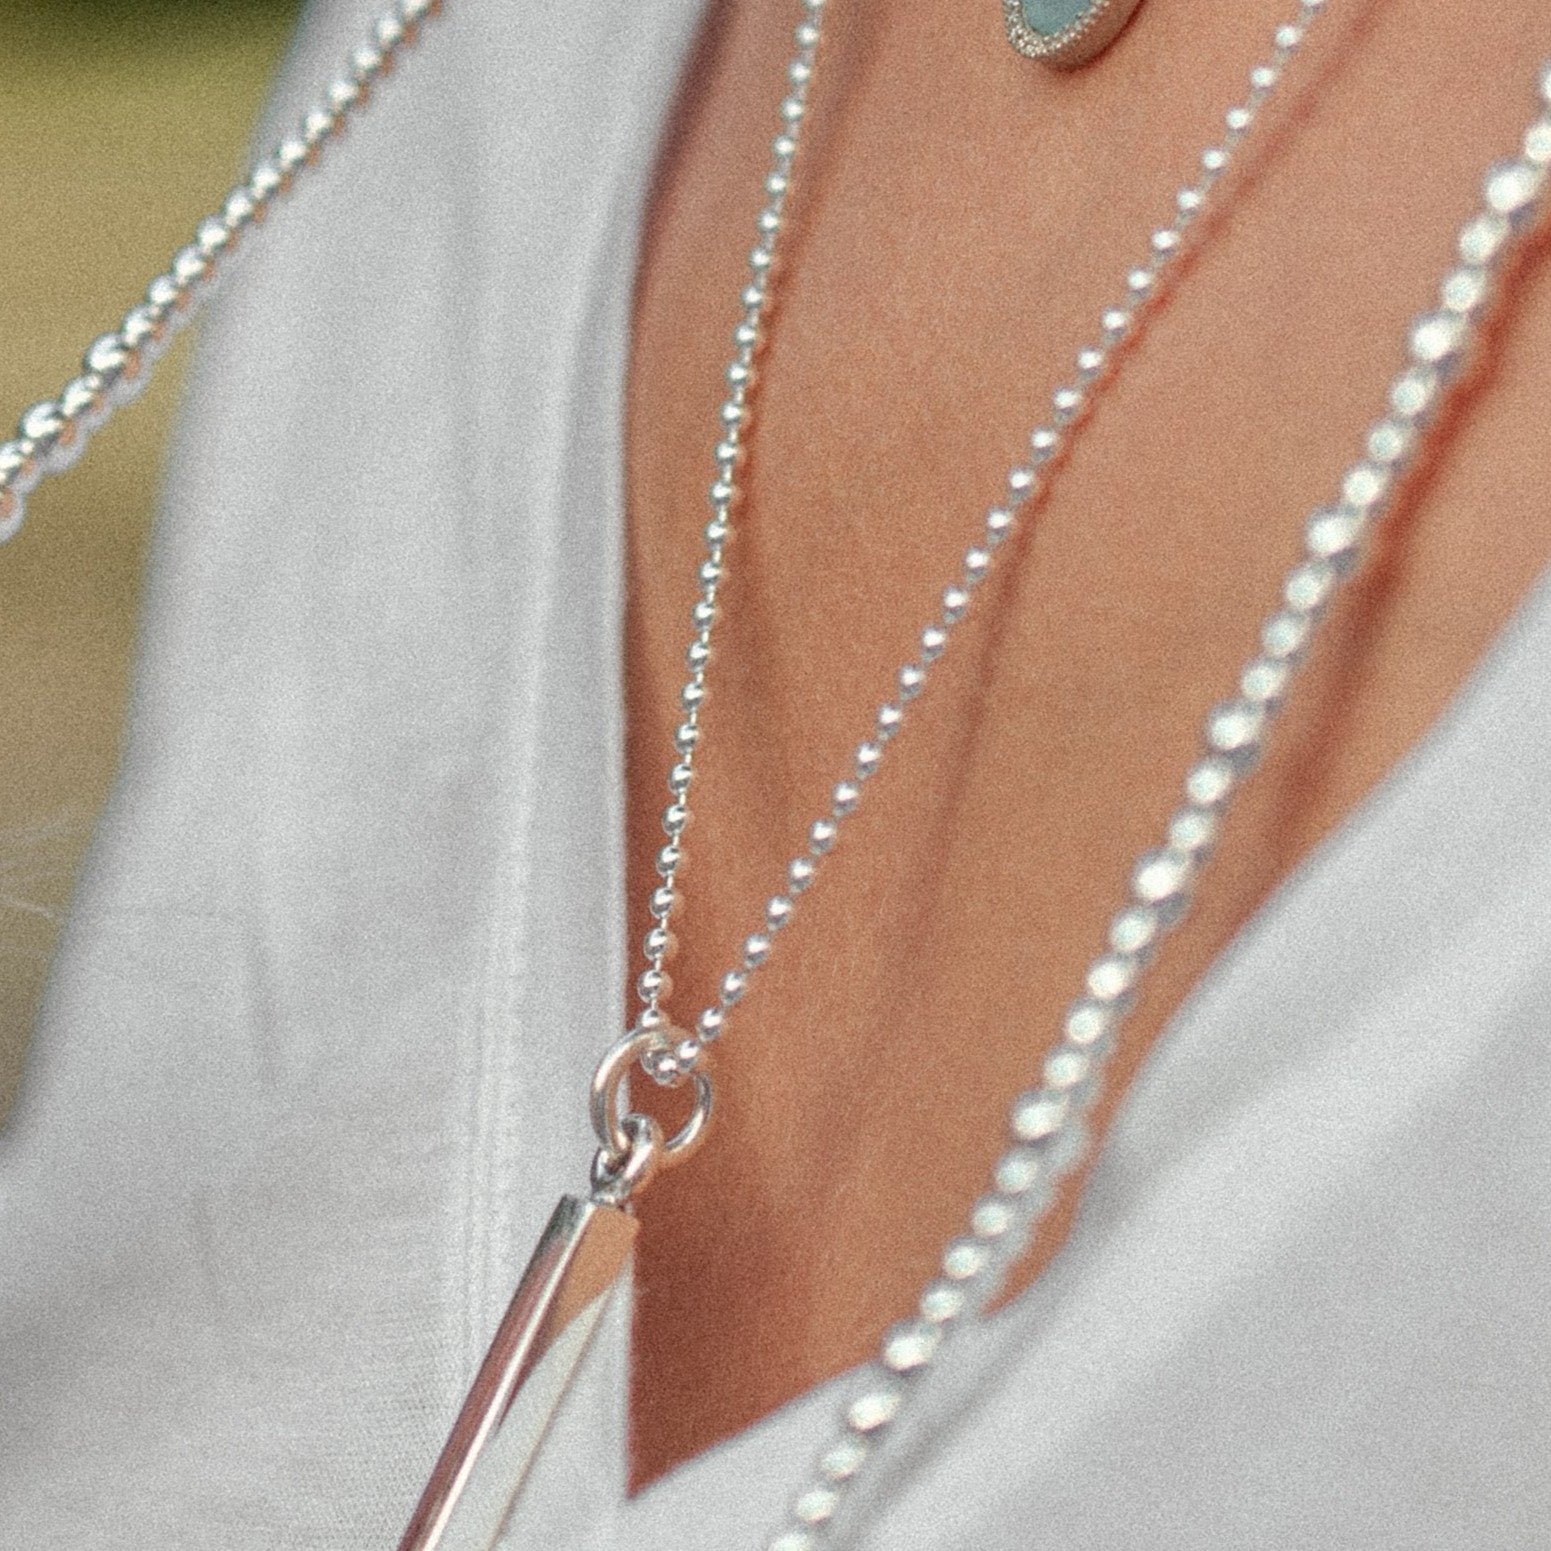 Ball Chains - Sterling Silver - Suetables